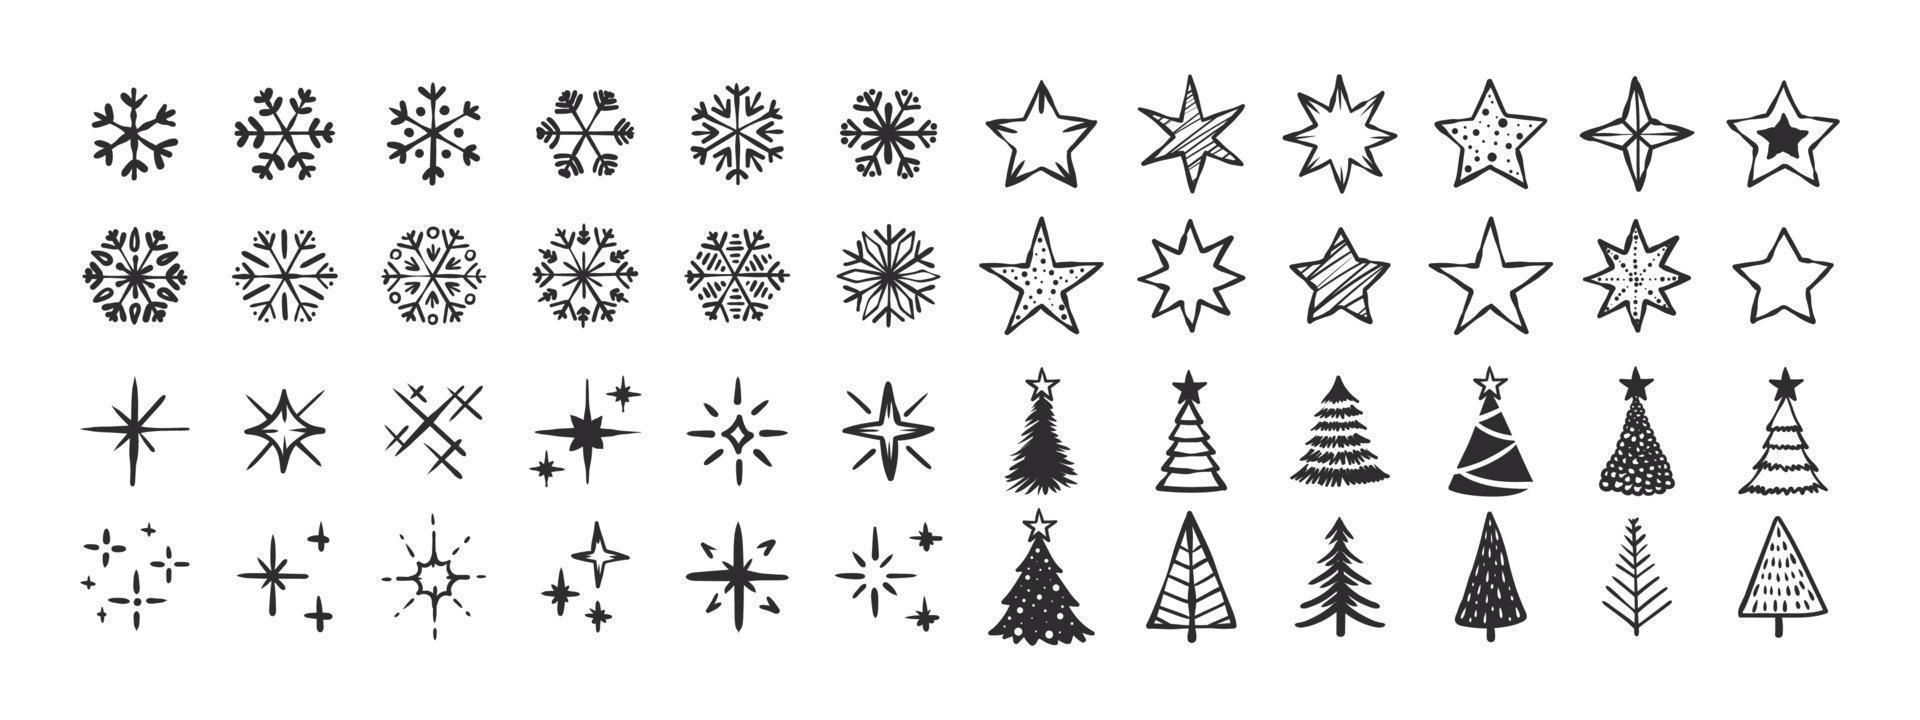 Icons of the Snowflake Tree and Stars. Simple christmas icons. Xmas signs. Vector icons